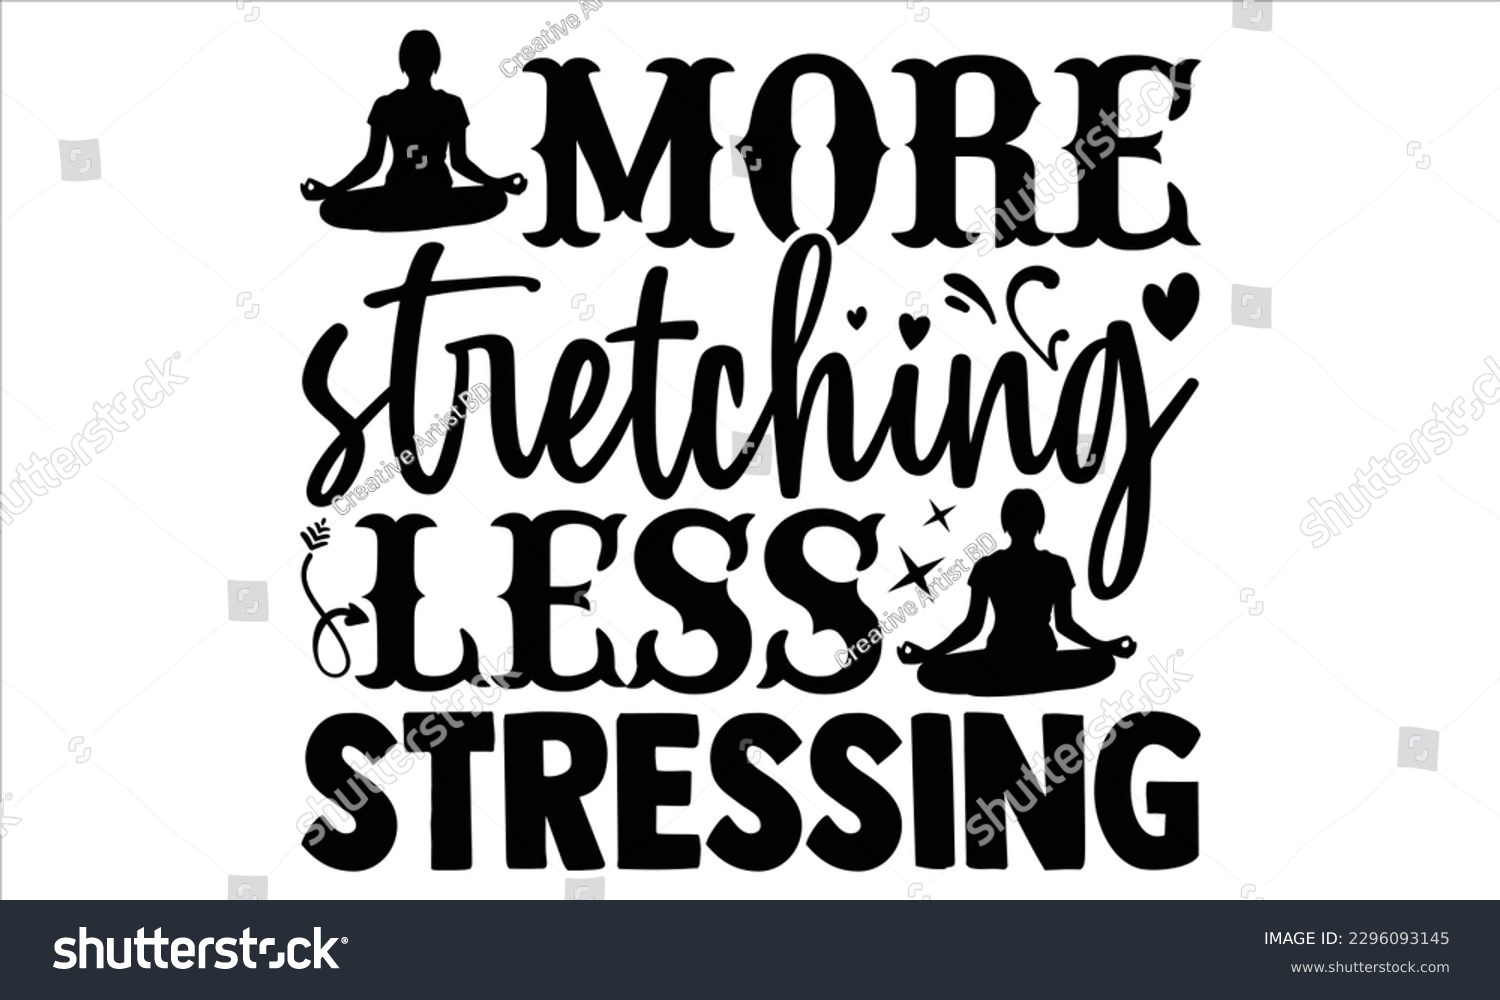 SVG of More stretching less stressing - Yoga Day T Shirt Design, Hand drawn lettering phrase, Cutting Cricut and Silhouette, card, Typography Vector illustration for poster, banner, flyer and mug. svg